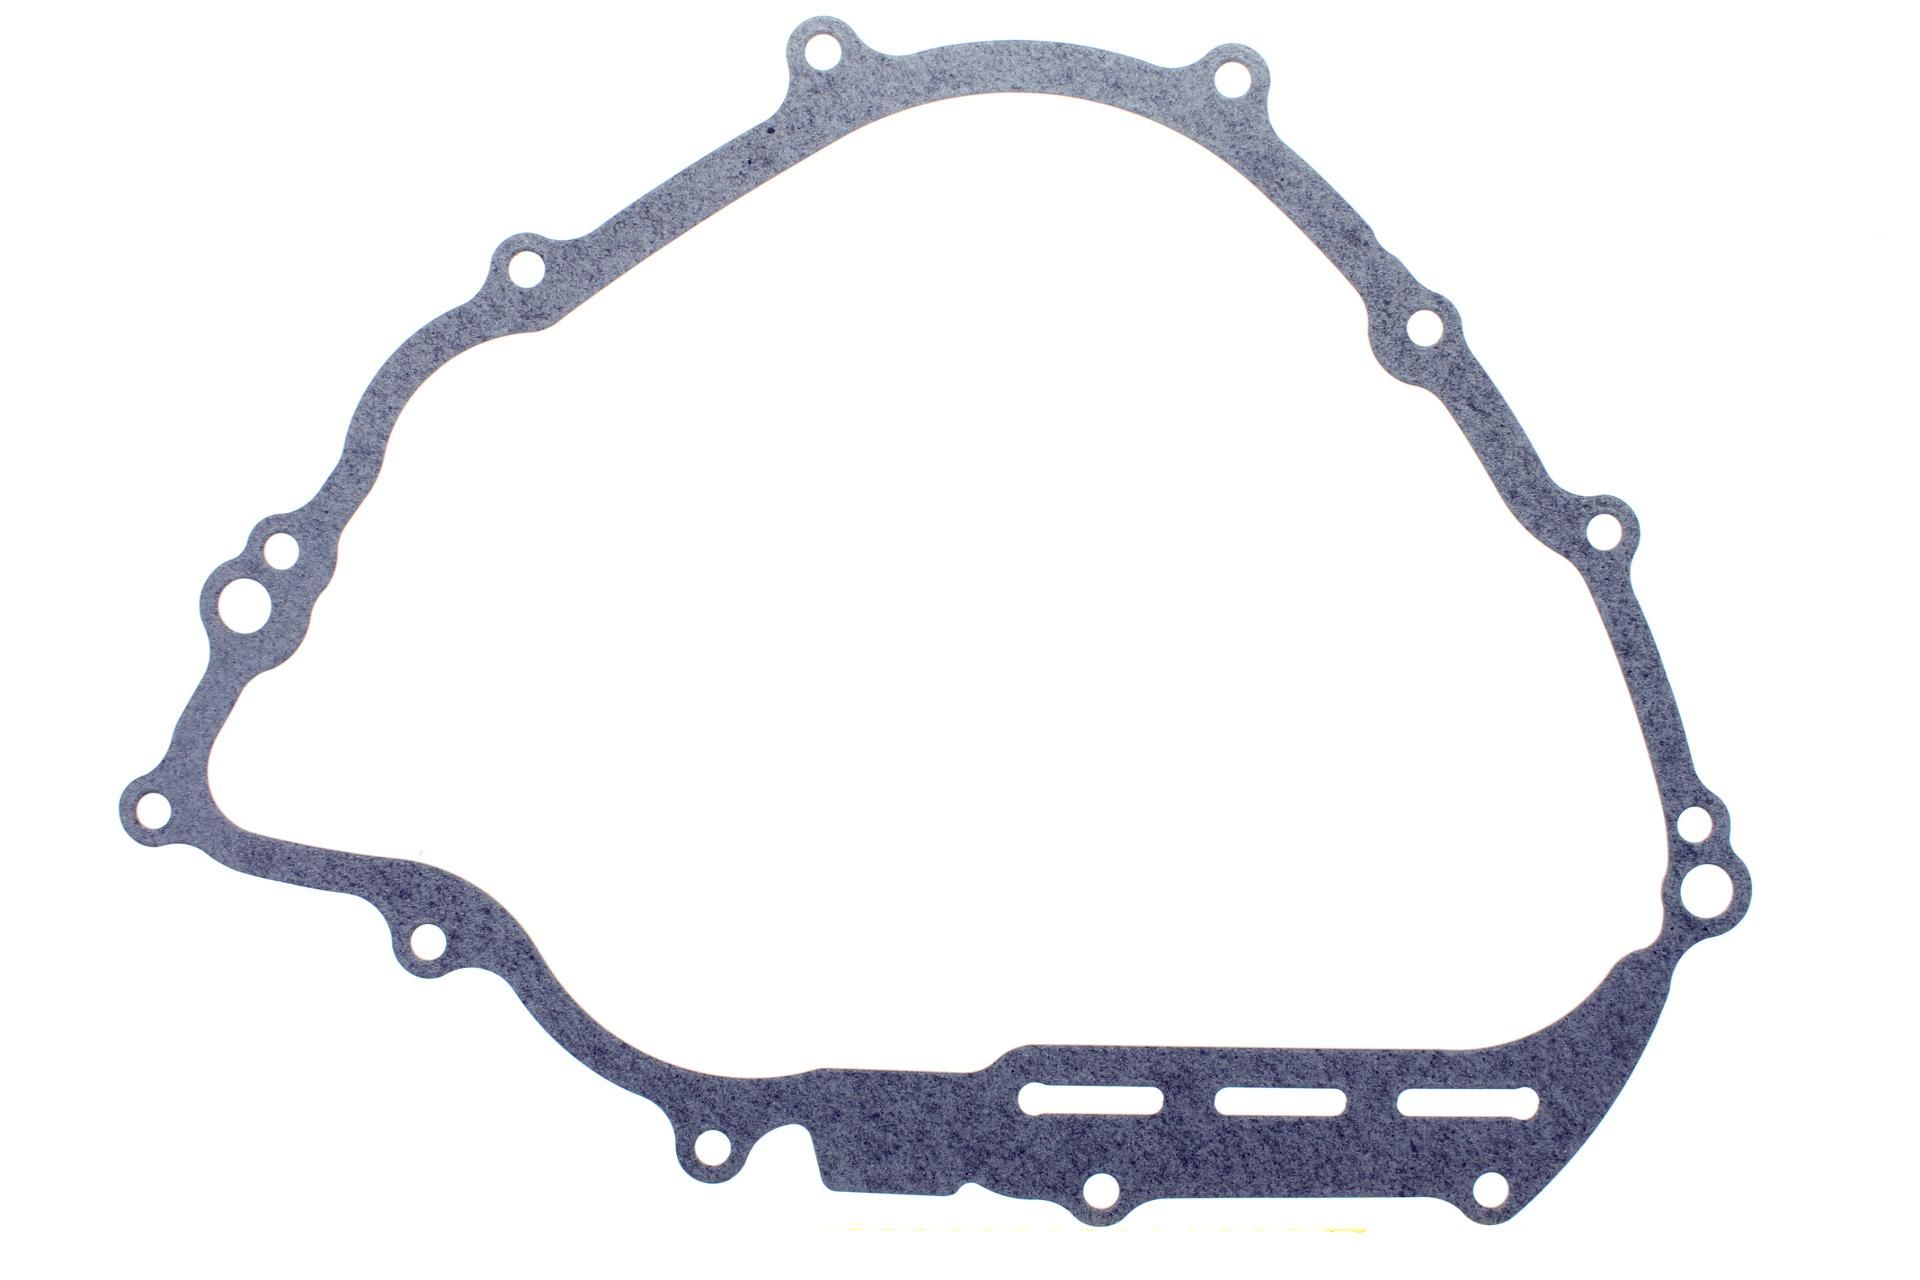 3B4-15451-00-00 CRANKCASE COVER GASKET